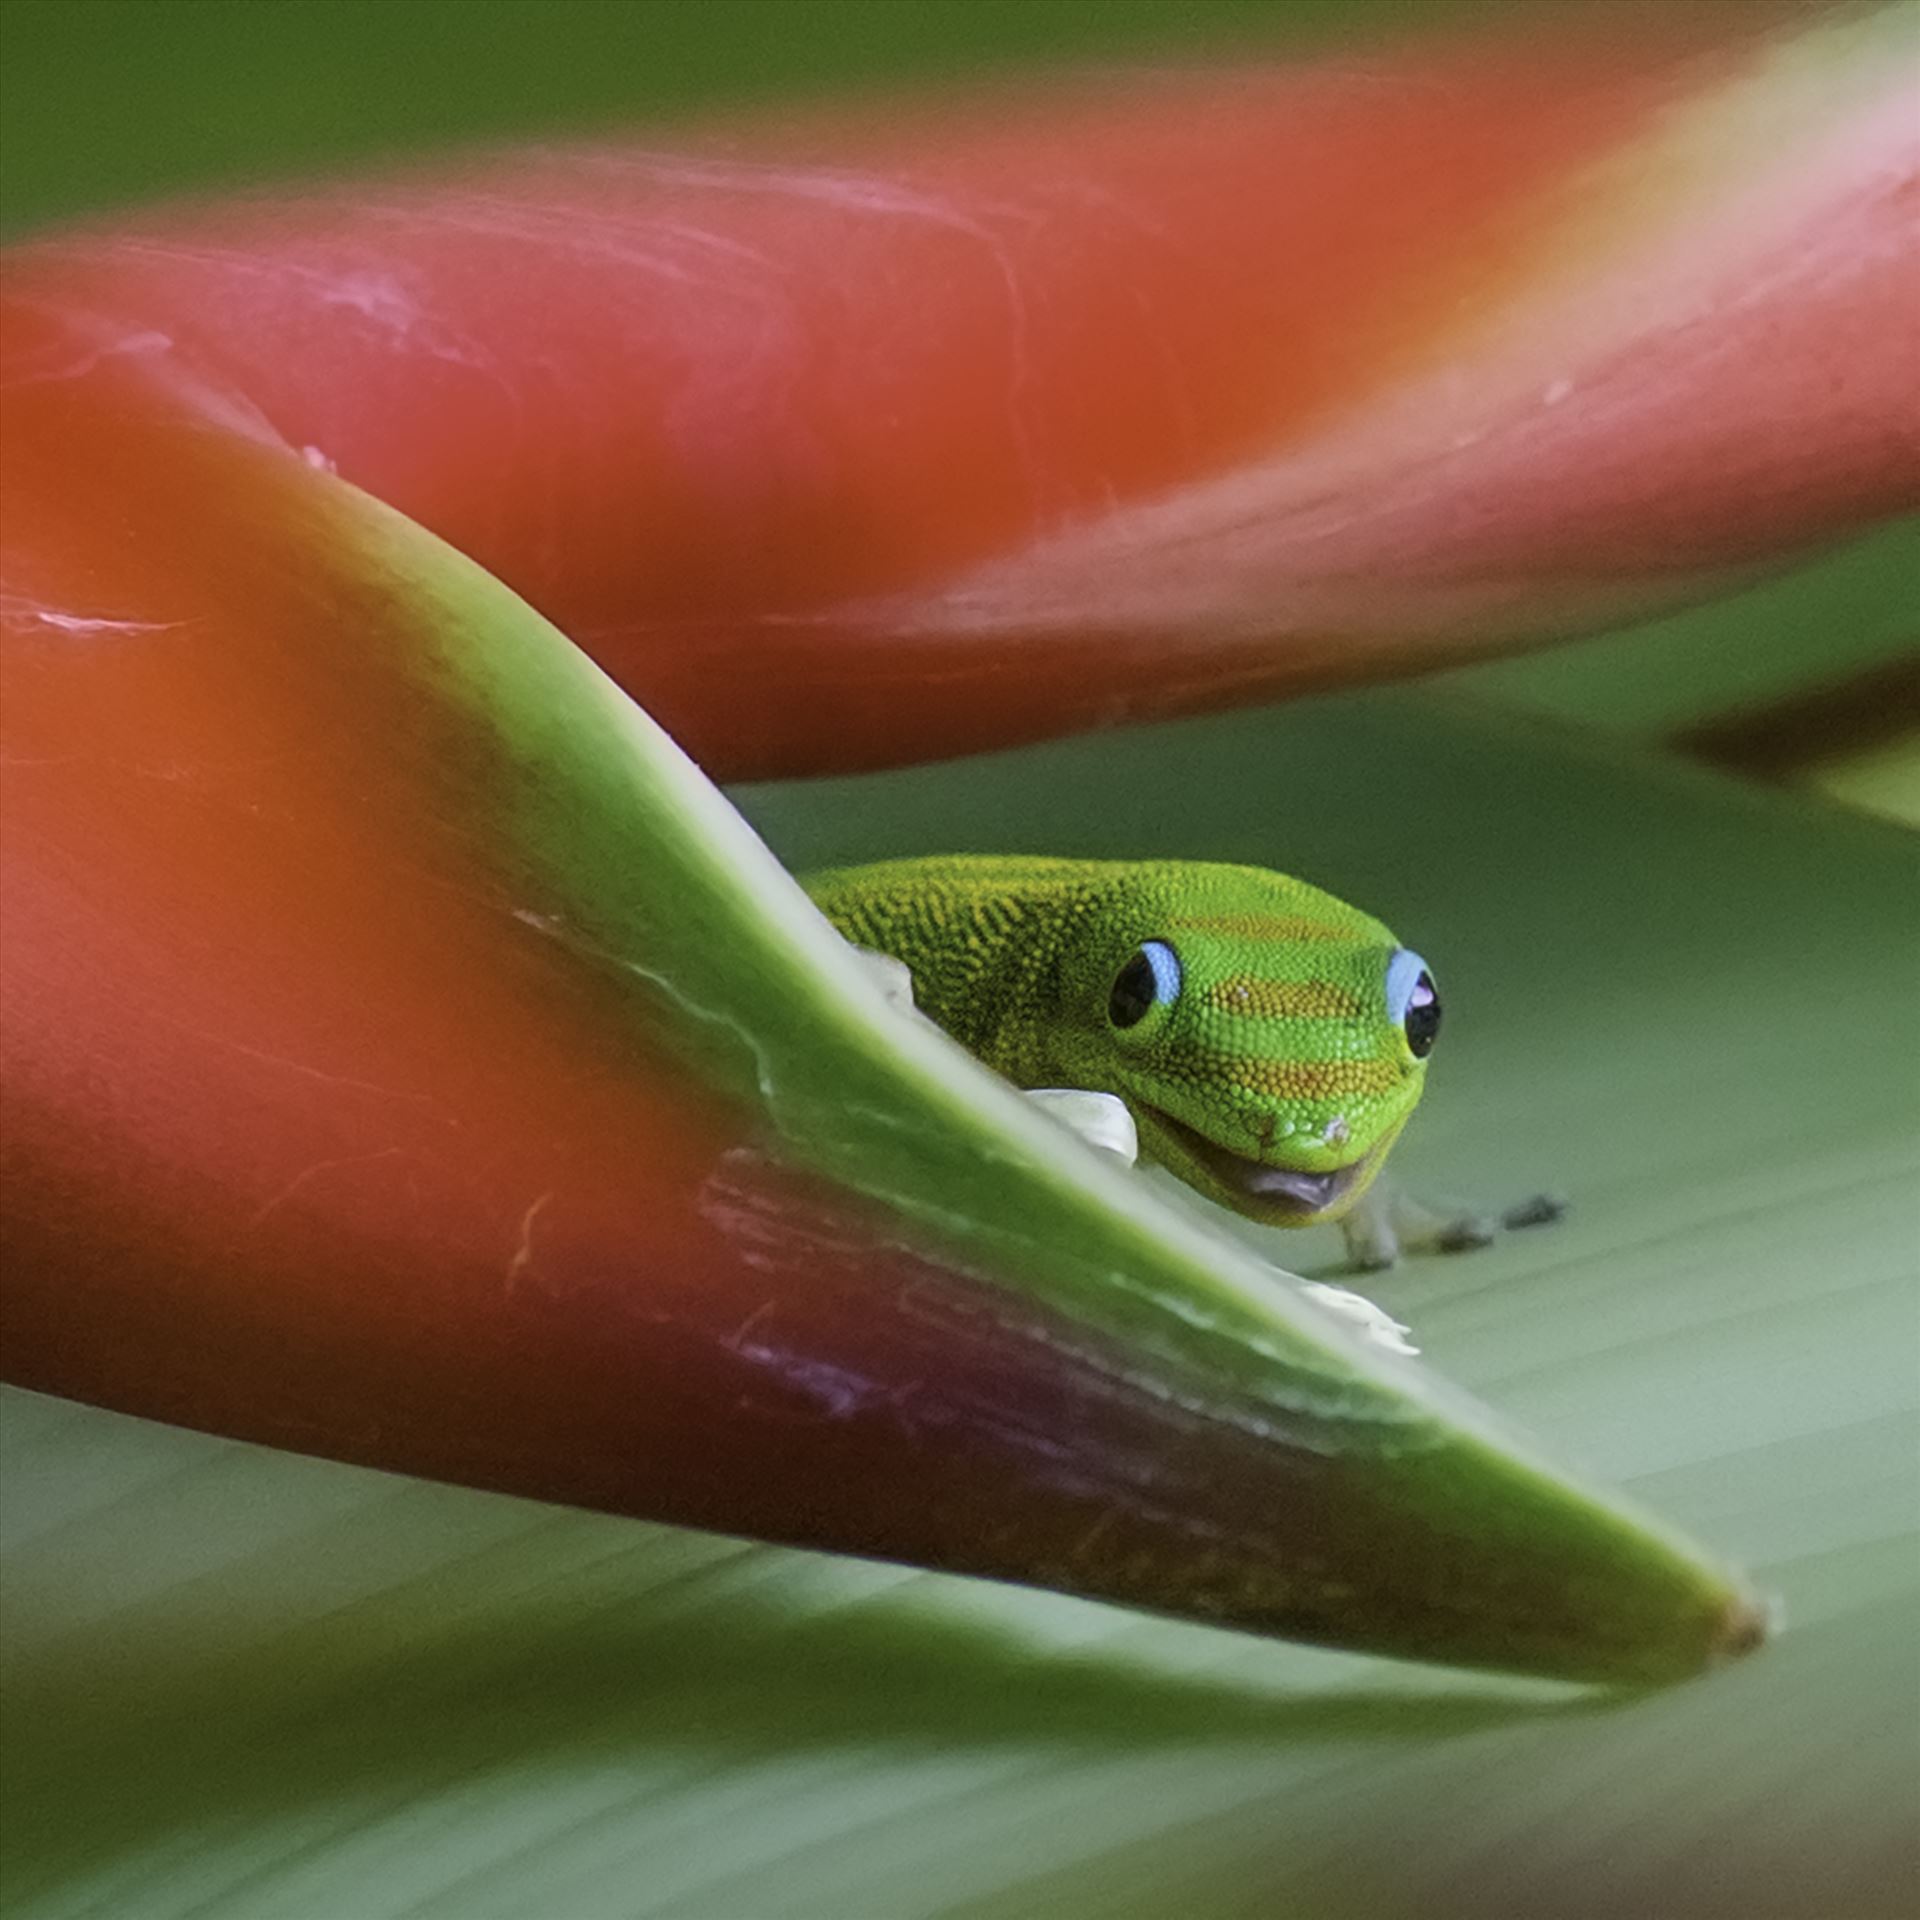 Gecko Gold dust day gecko in a Hanging Lobster Claw Plant, Oahu, Hawaii by Denise Buckley Crawford